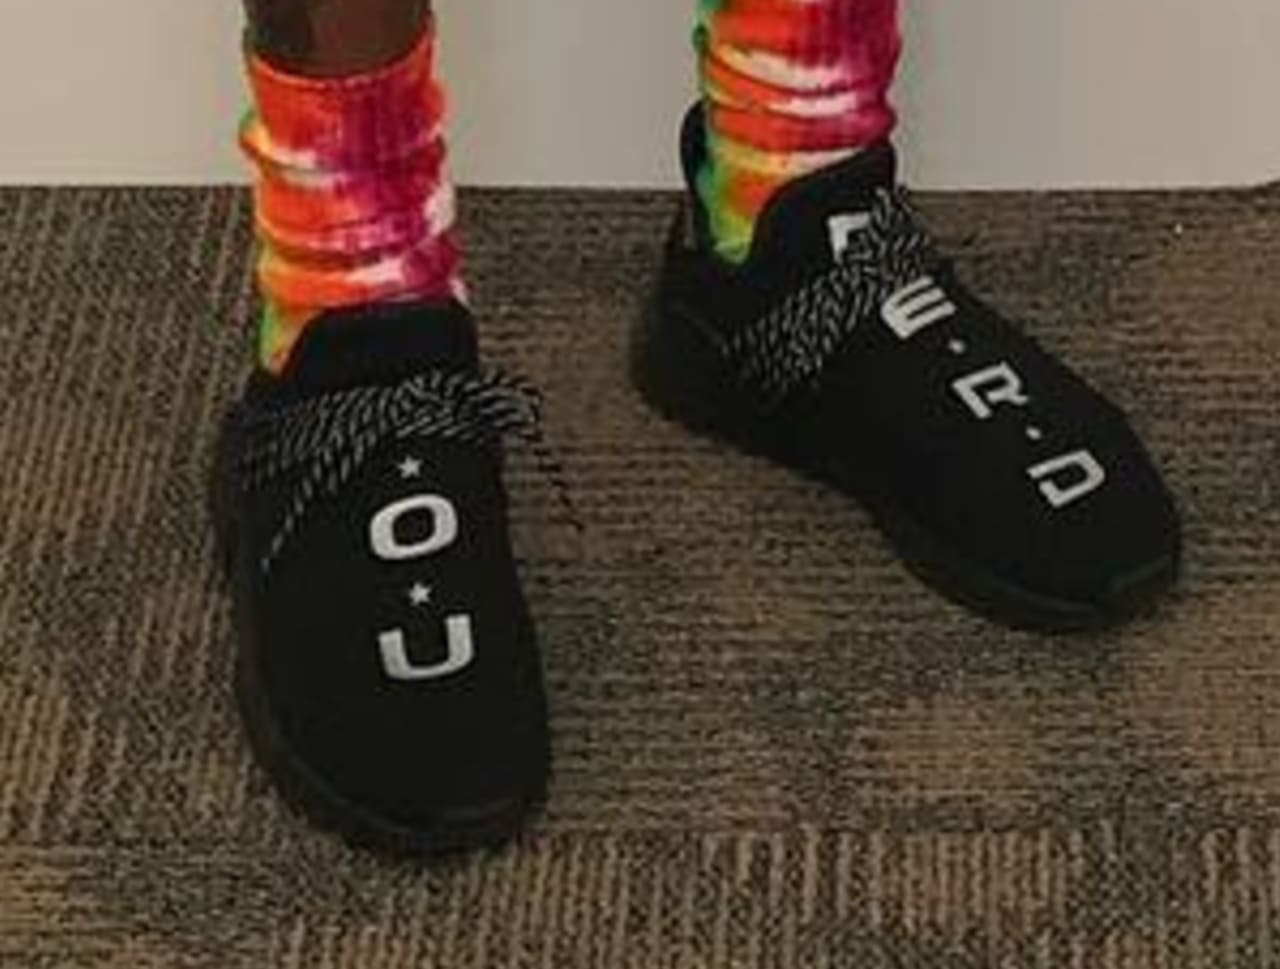 Pharrell Spotted In An N.E.R.D. Colorway Of The Human Race NMD 